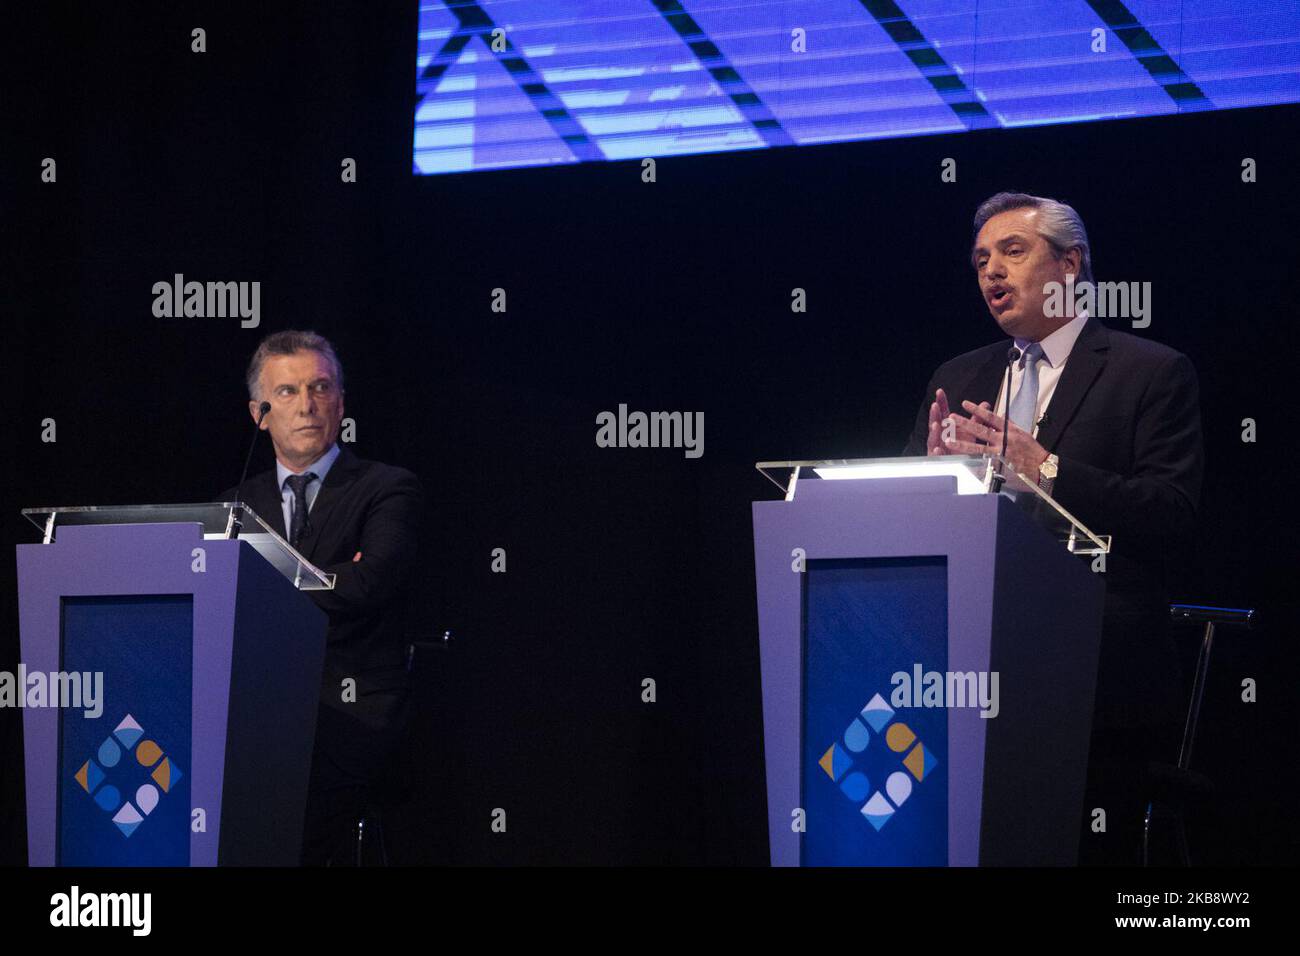 Mauricio Macri, Argentina's president, left, listens while Alberto Fernandez, presidential candidate for Frente de Todos party, speaks during a presidential candidate debate in Buenos Aires, Argentina, on Sunday, Oct. 20, 2019. (Photo by Matías Baglietto/NurPhoto) Stock Photo